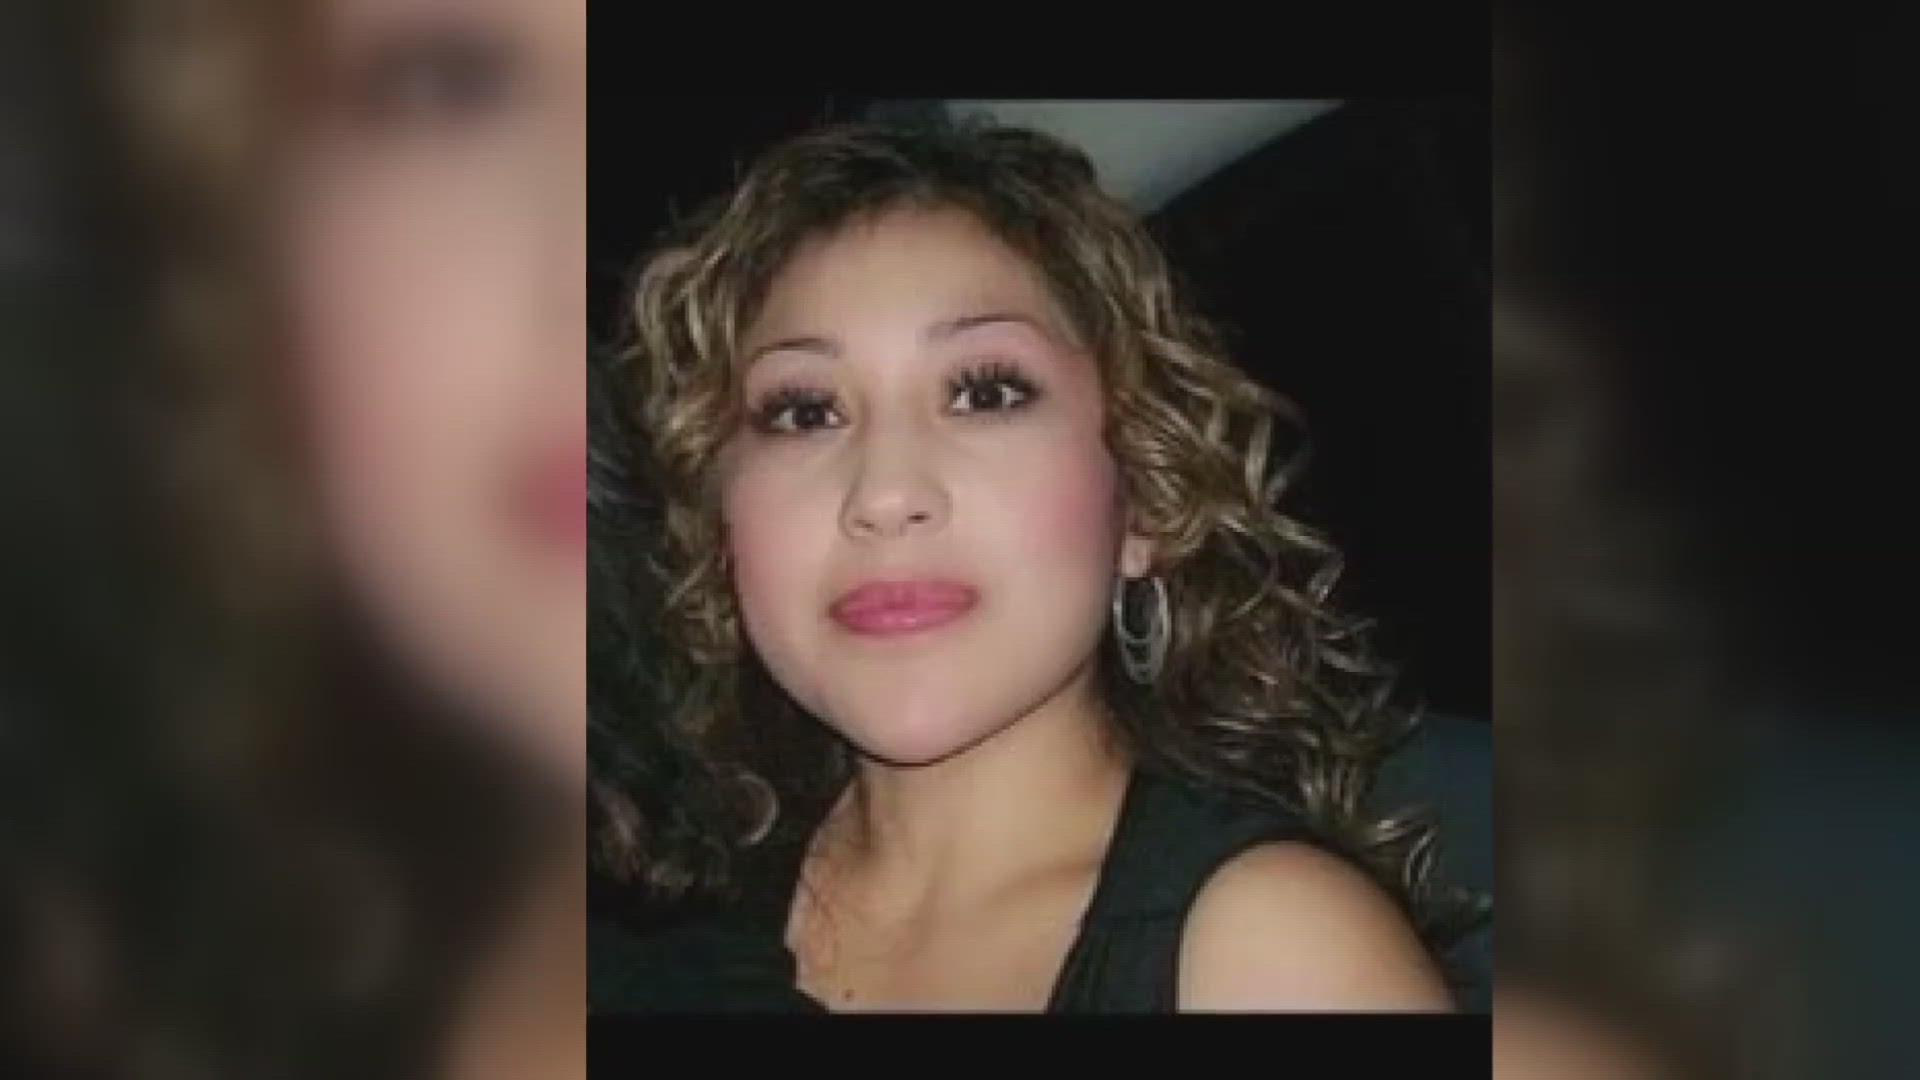 Juanita Maldonado was 36-years old when she was shot and killed outside a St. Patrick's Day party in 2013